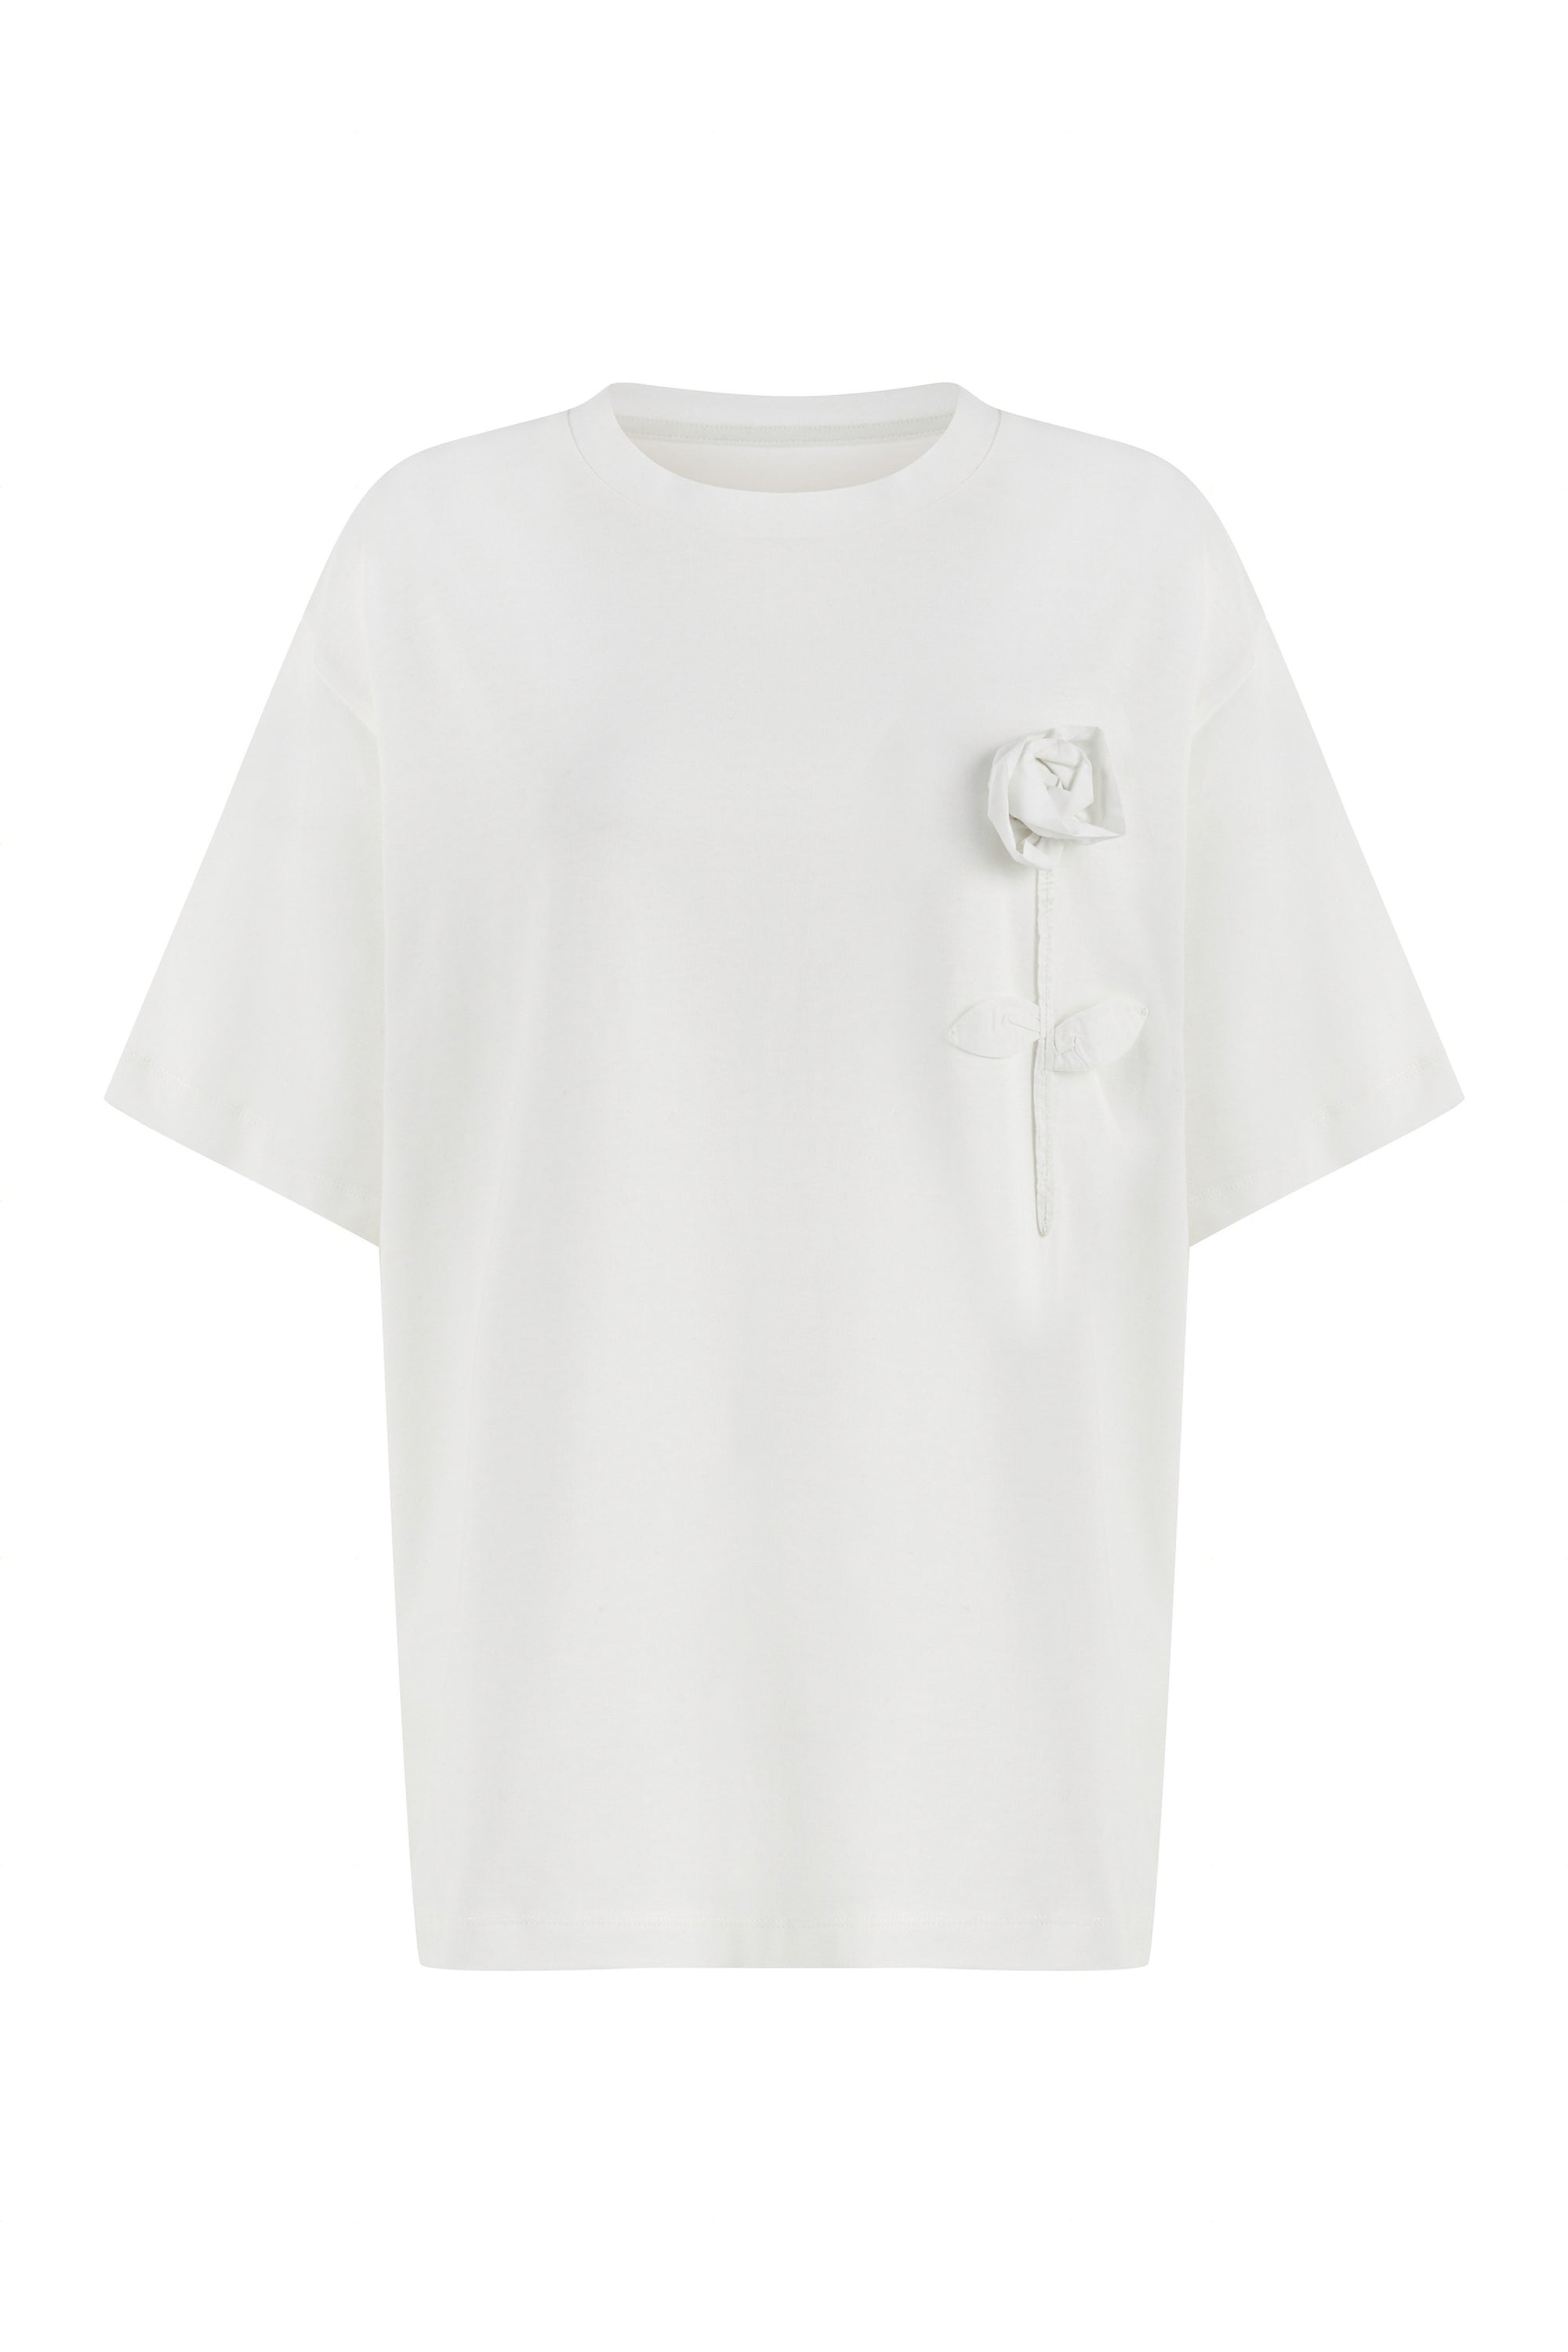 Nocturne Women's White Oversized Embroidered T-shirt